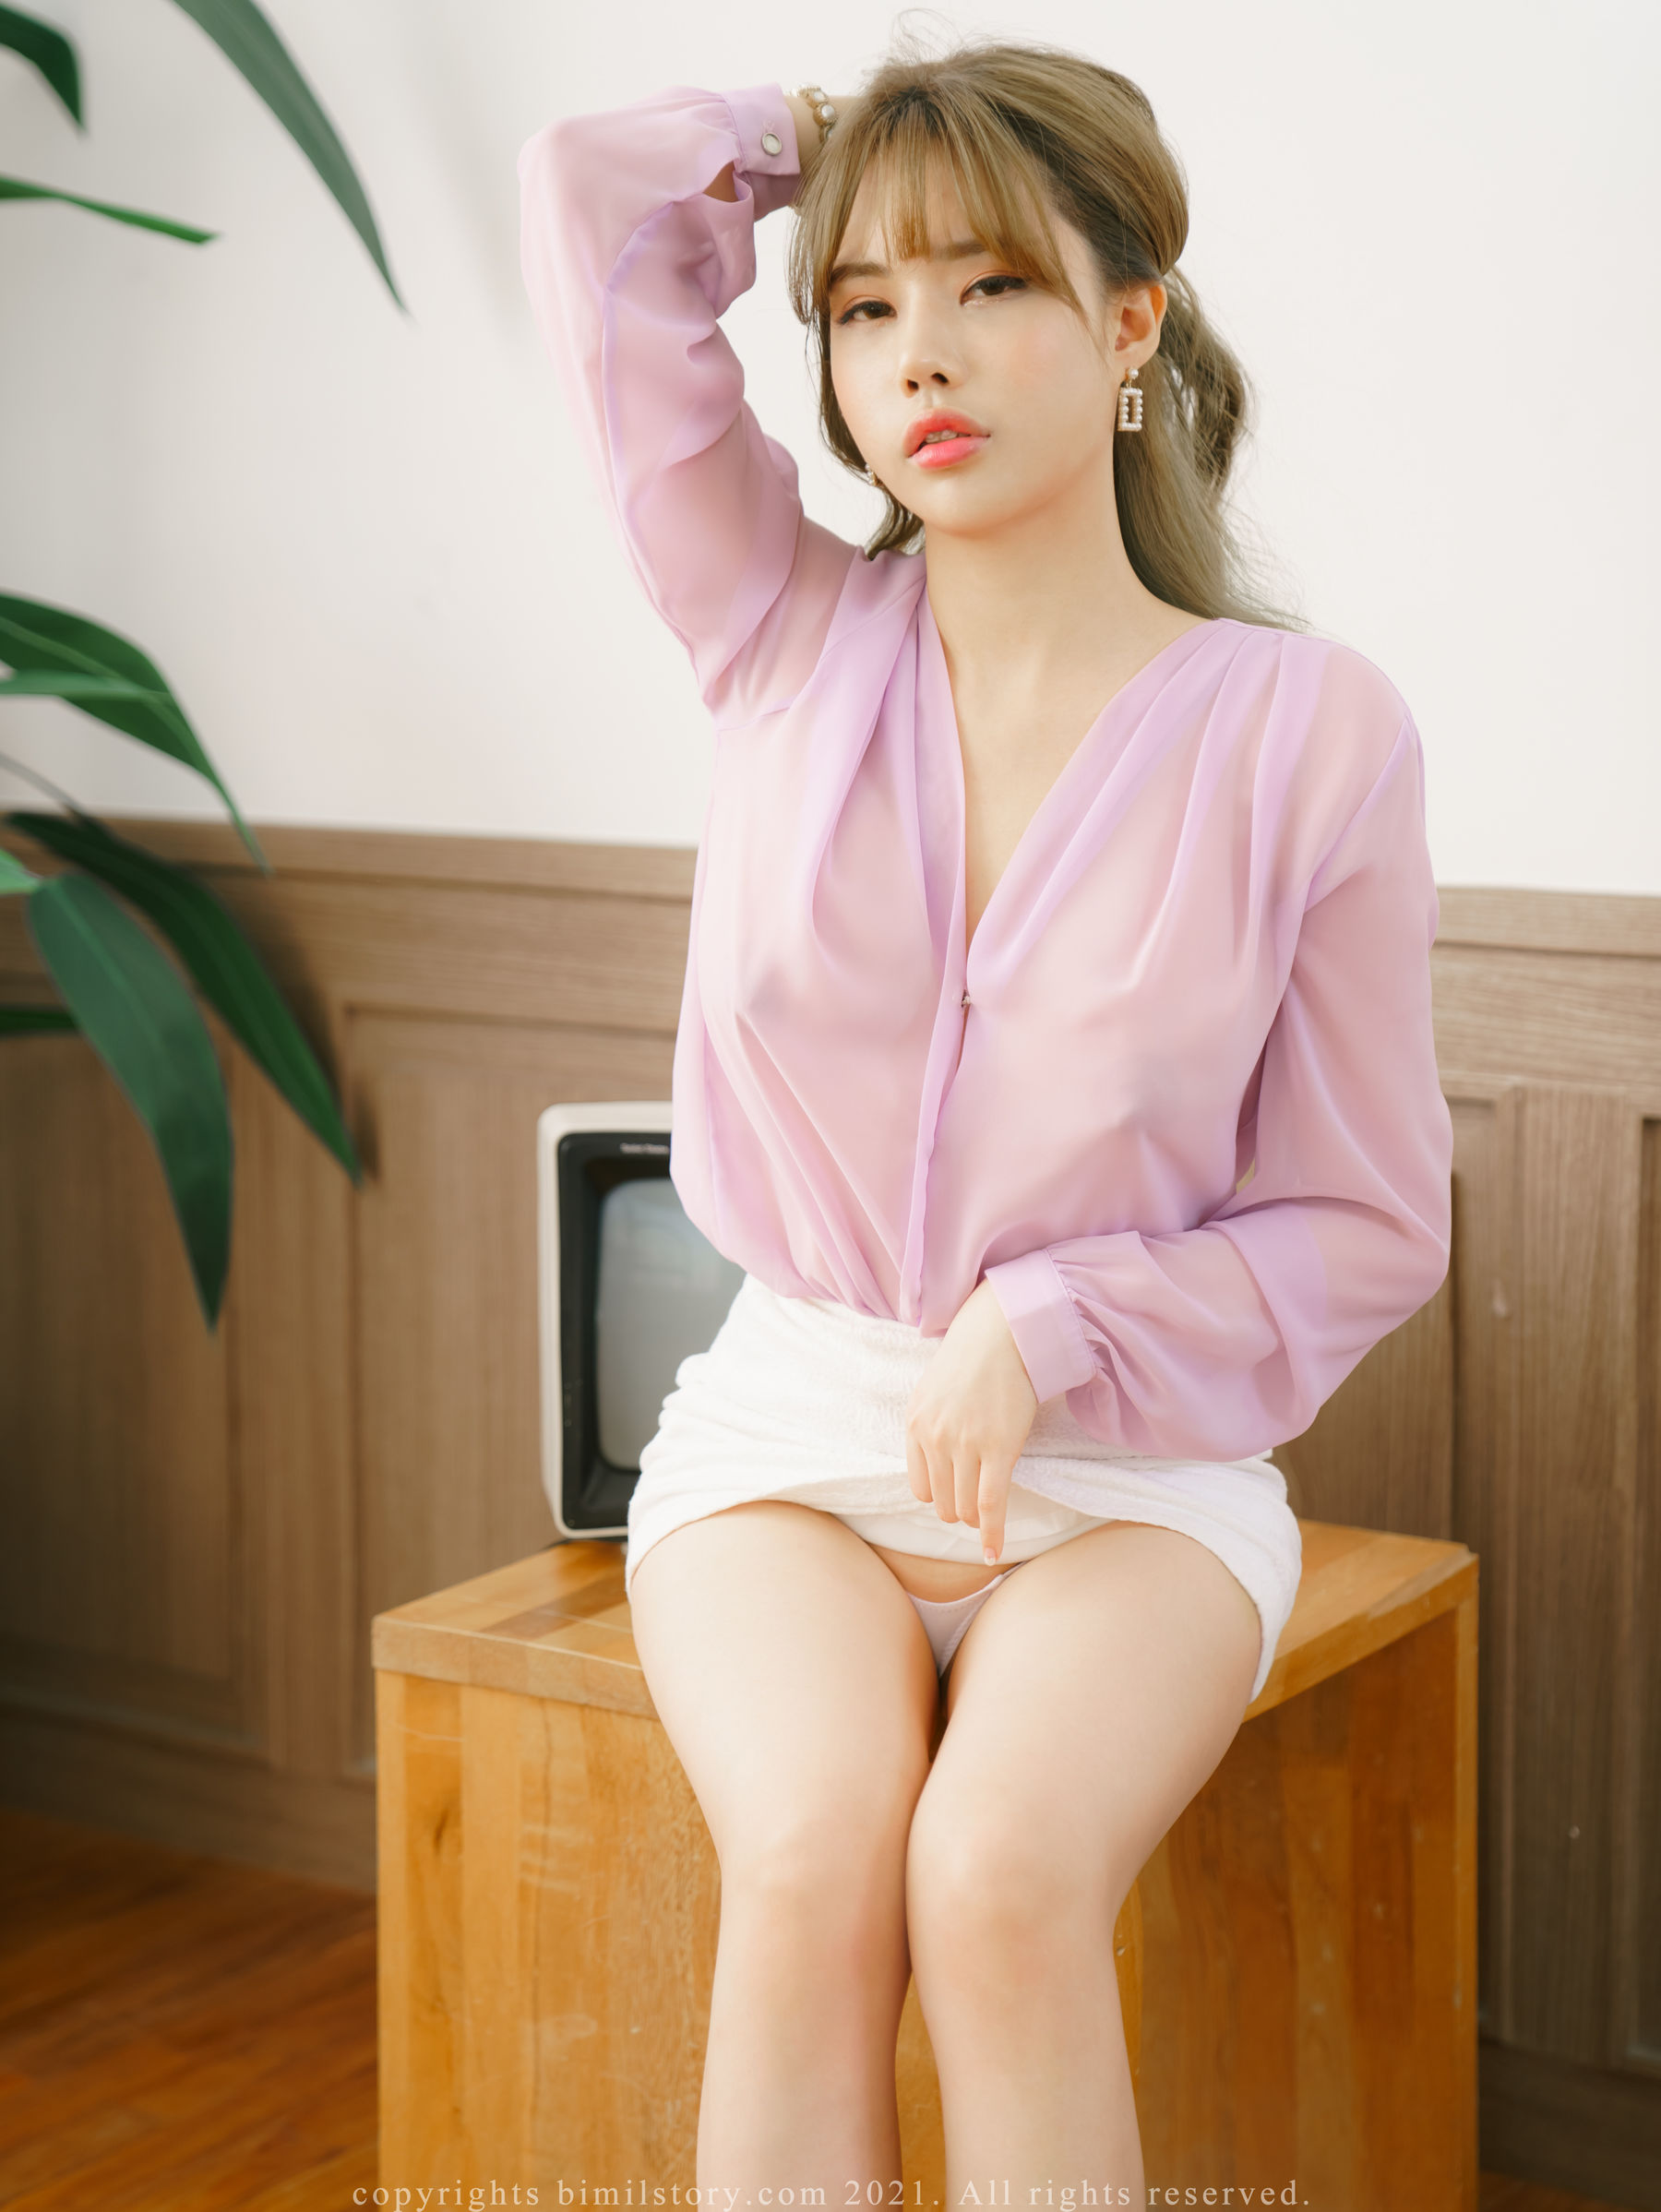 [Bimilstory] Eunha 2023.04.04 Vol.04 How to dress in case of F cup size woman  第24张